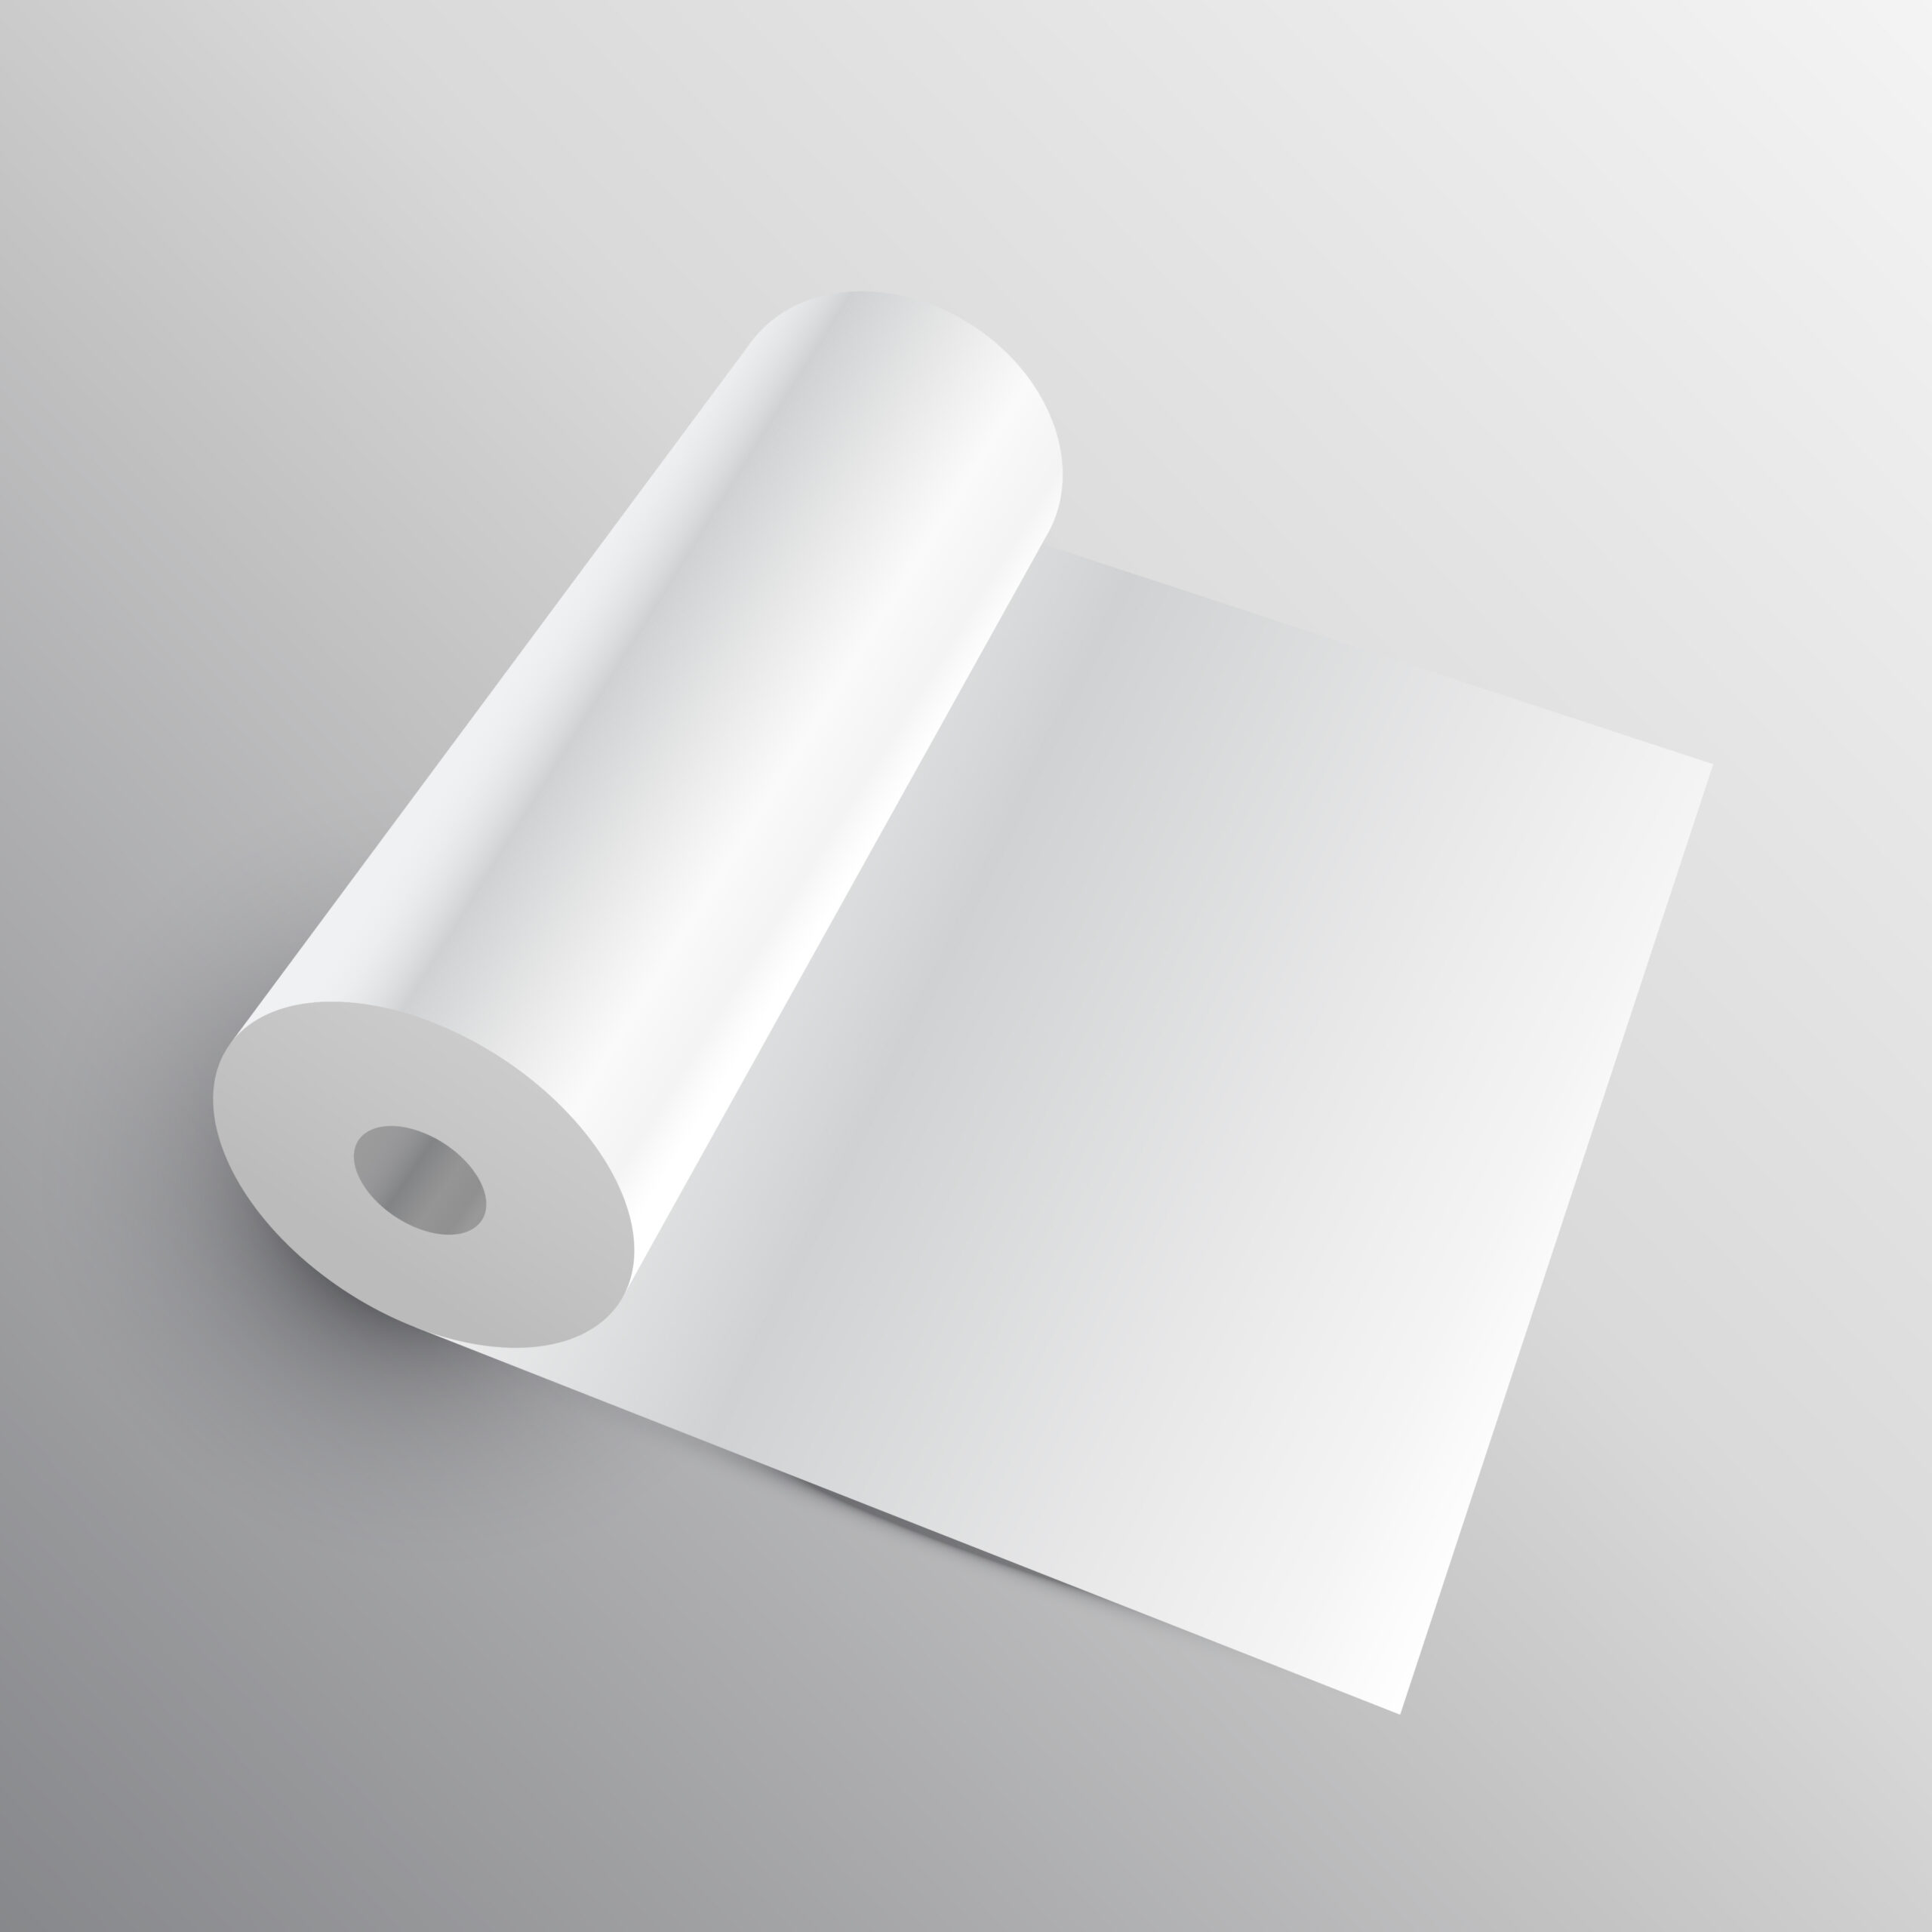 Ultrasound thermal paper